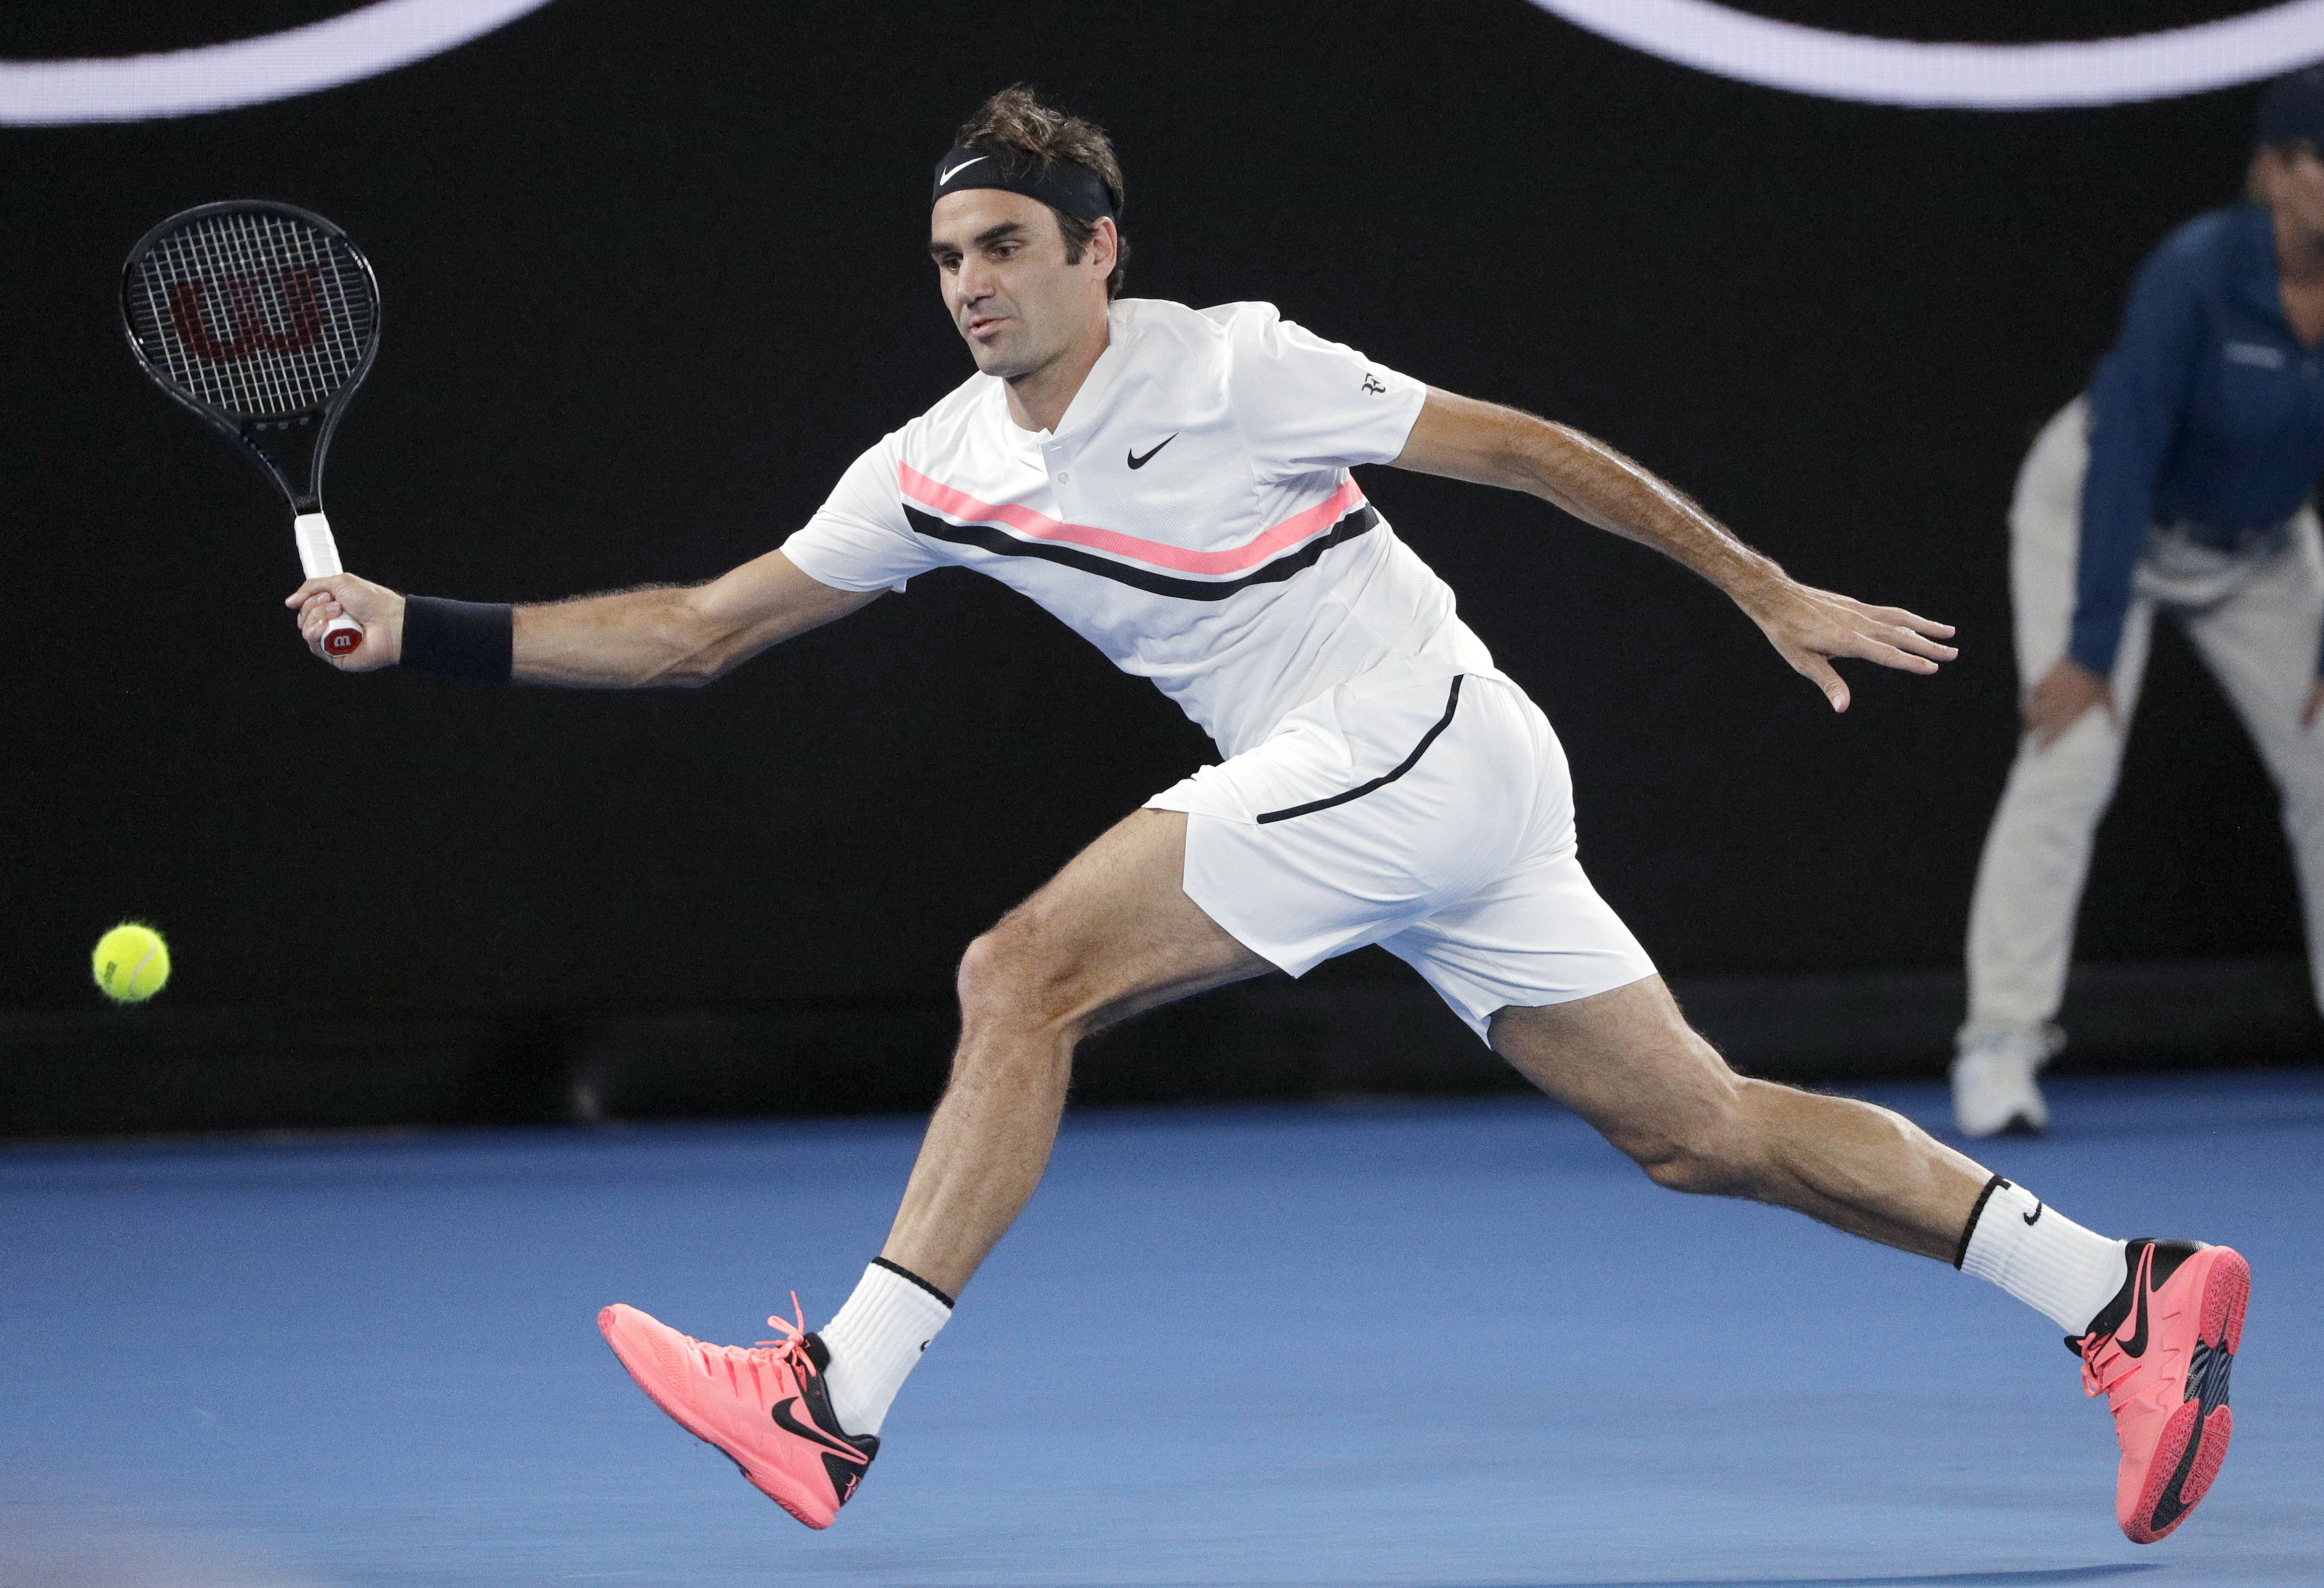 Roger Federers match-worn outfit from the 2018 Australian Open—where he won his last Grand Slam title—is up for auction